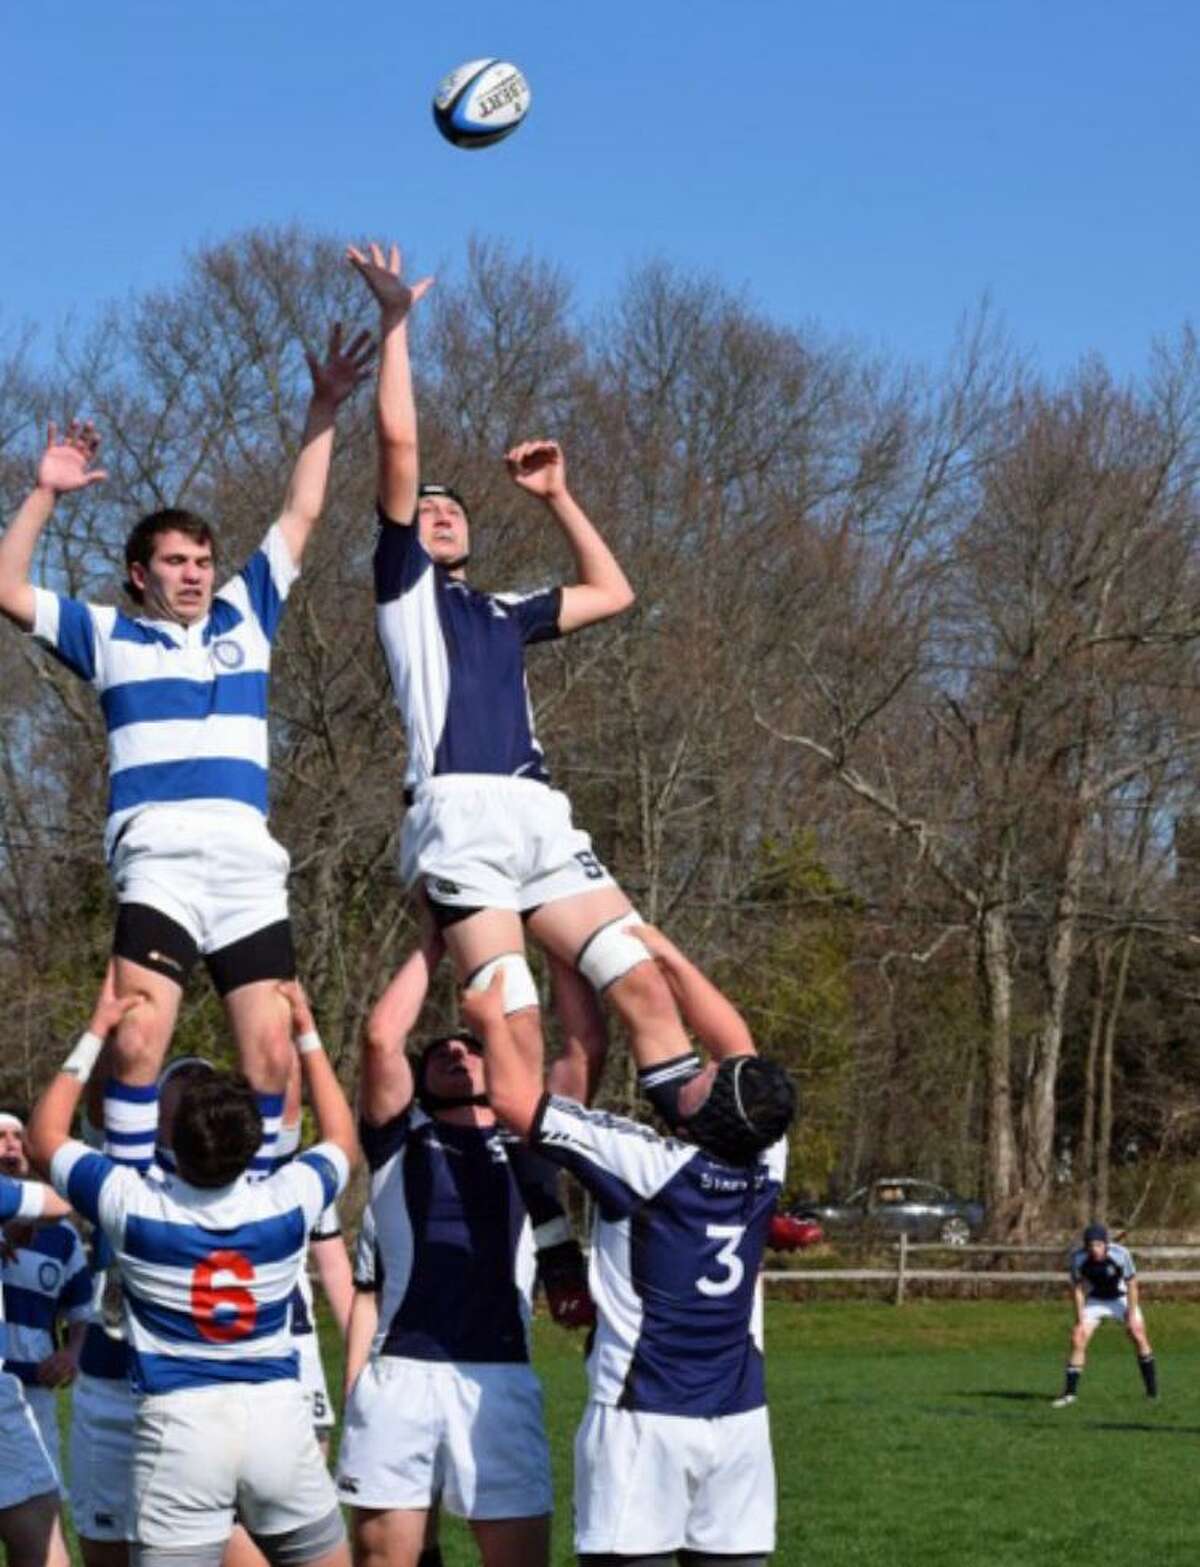 Action from the Staples rugby team's 54-5 win over Darien on Friday.